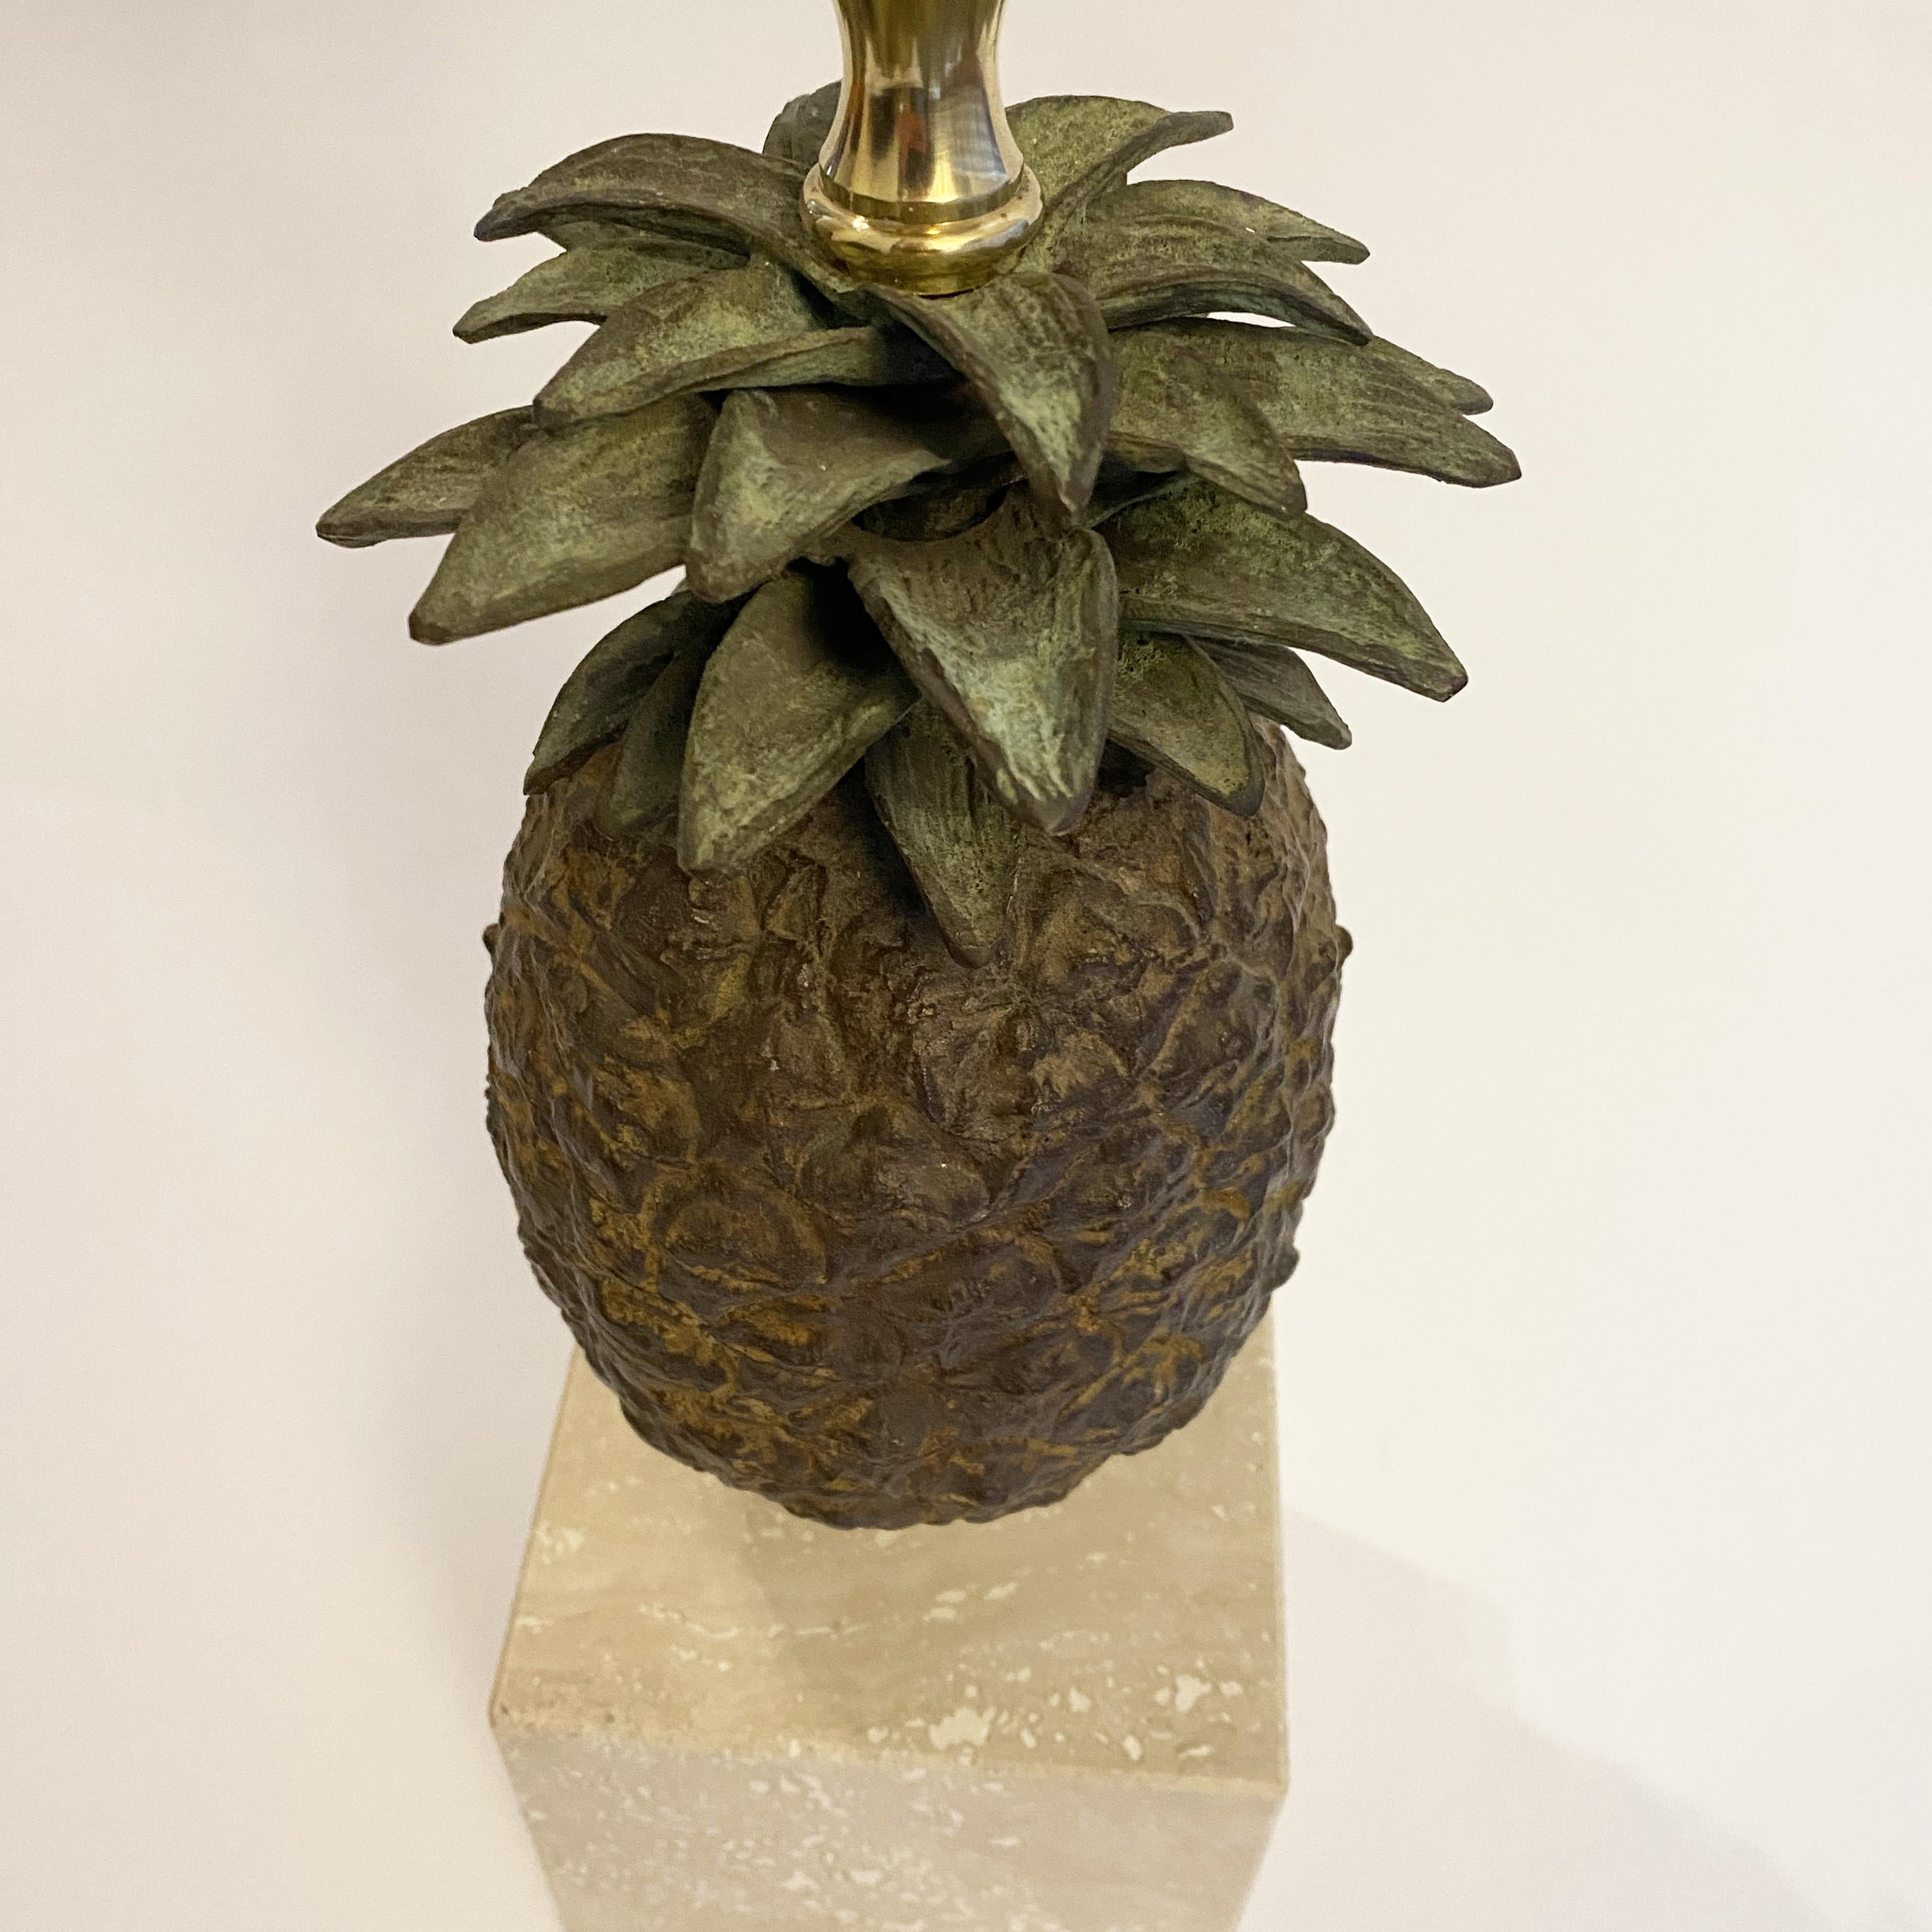 Patinated Hollywood Regency Pineapple Table Lamp in Patined Bronze and Travertine, 1970s For Sale